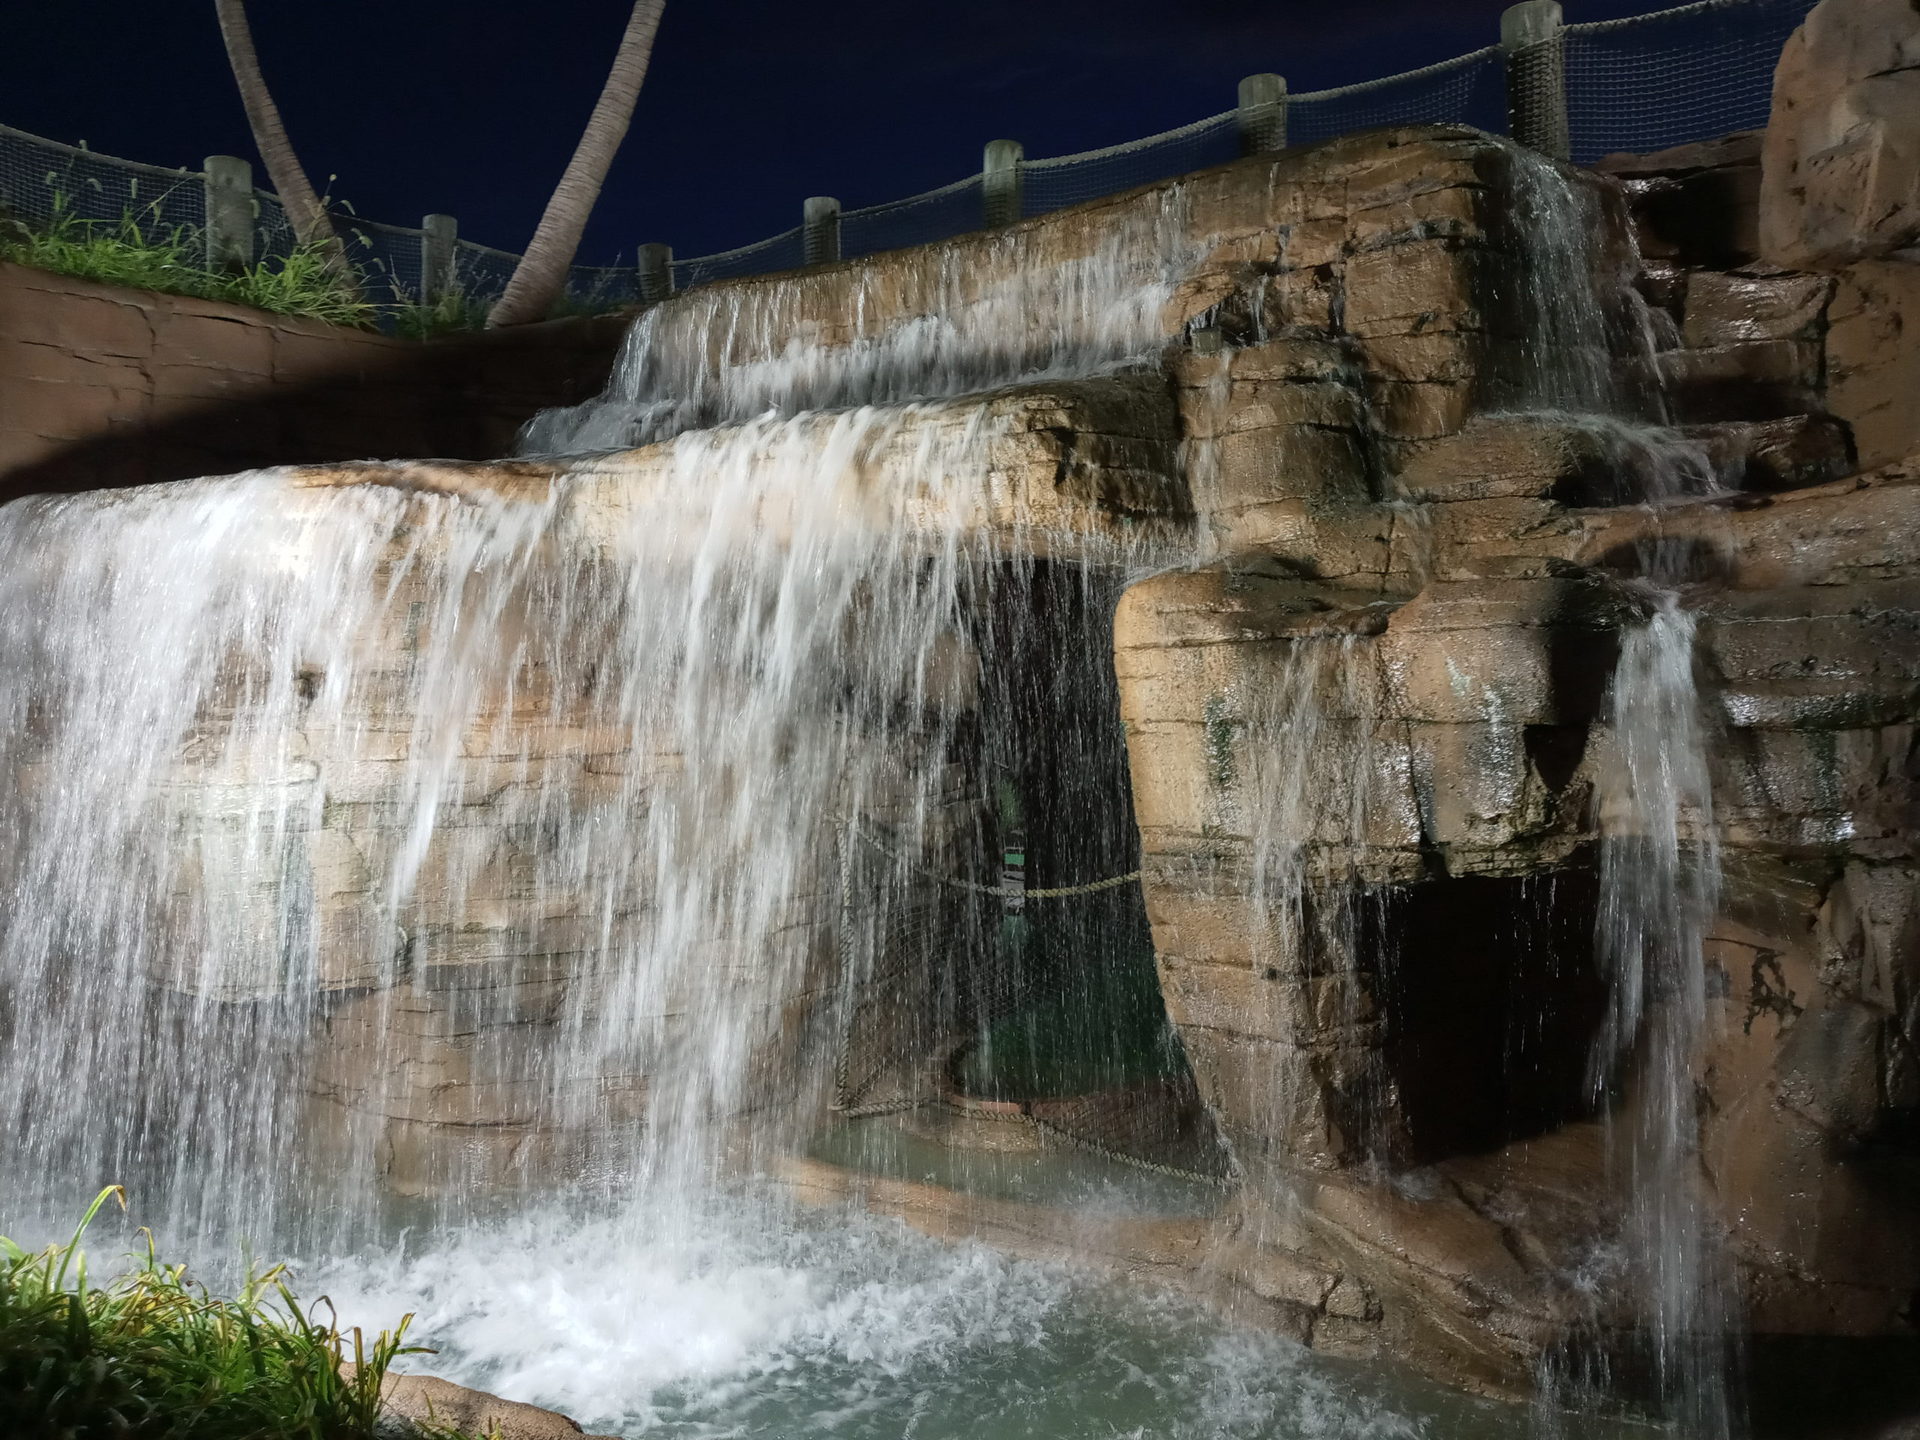 An image of a waterfall taken with the LG K51